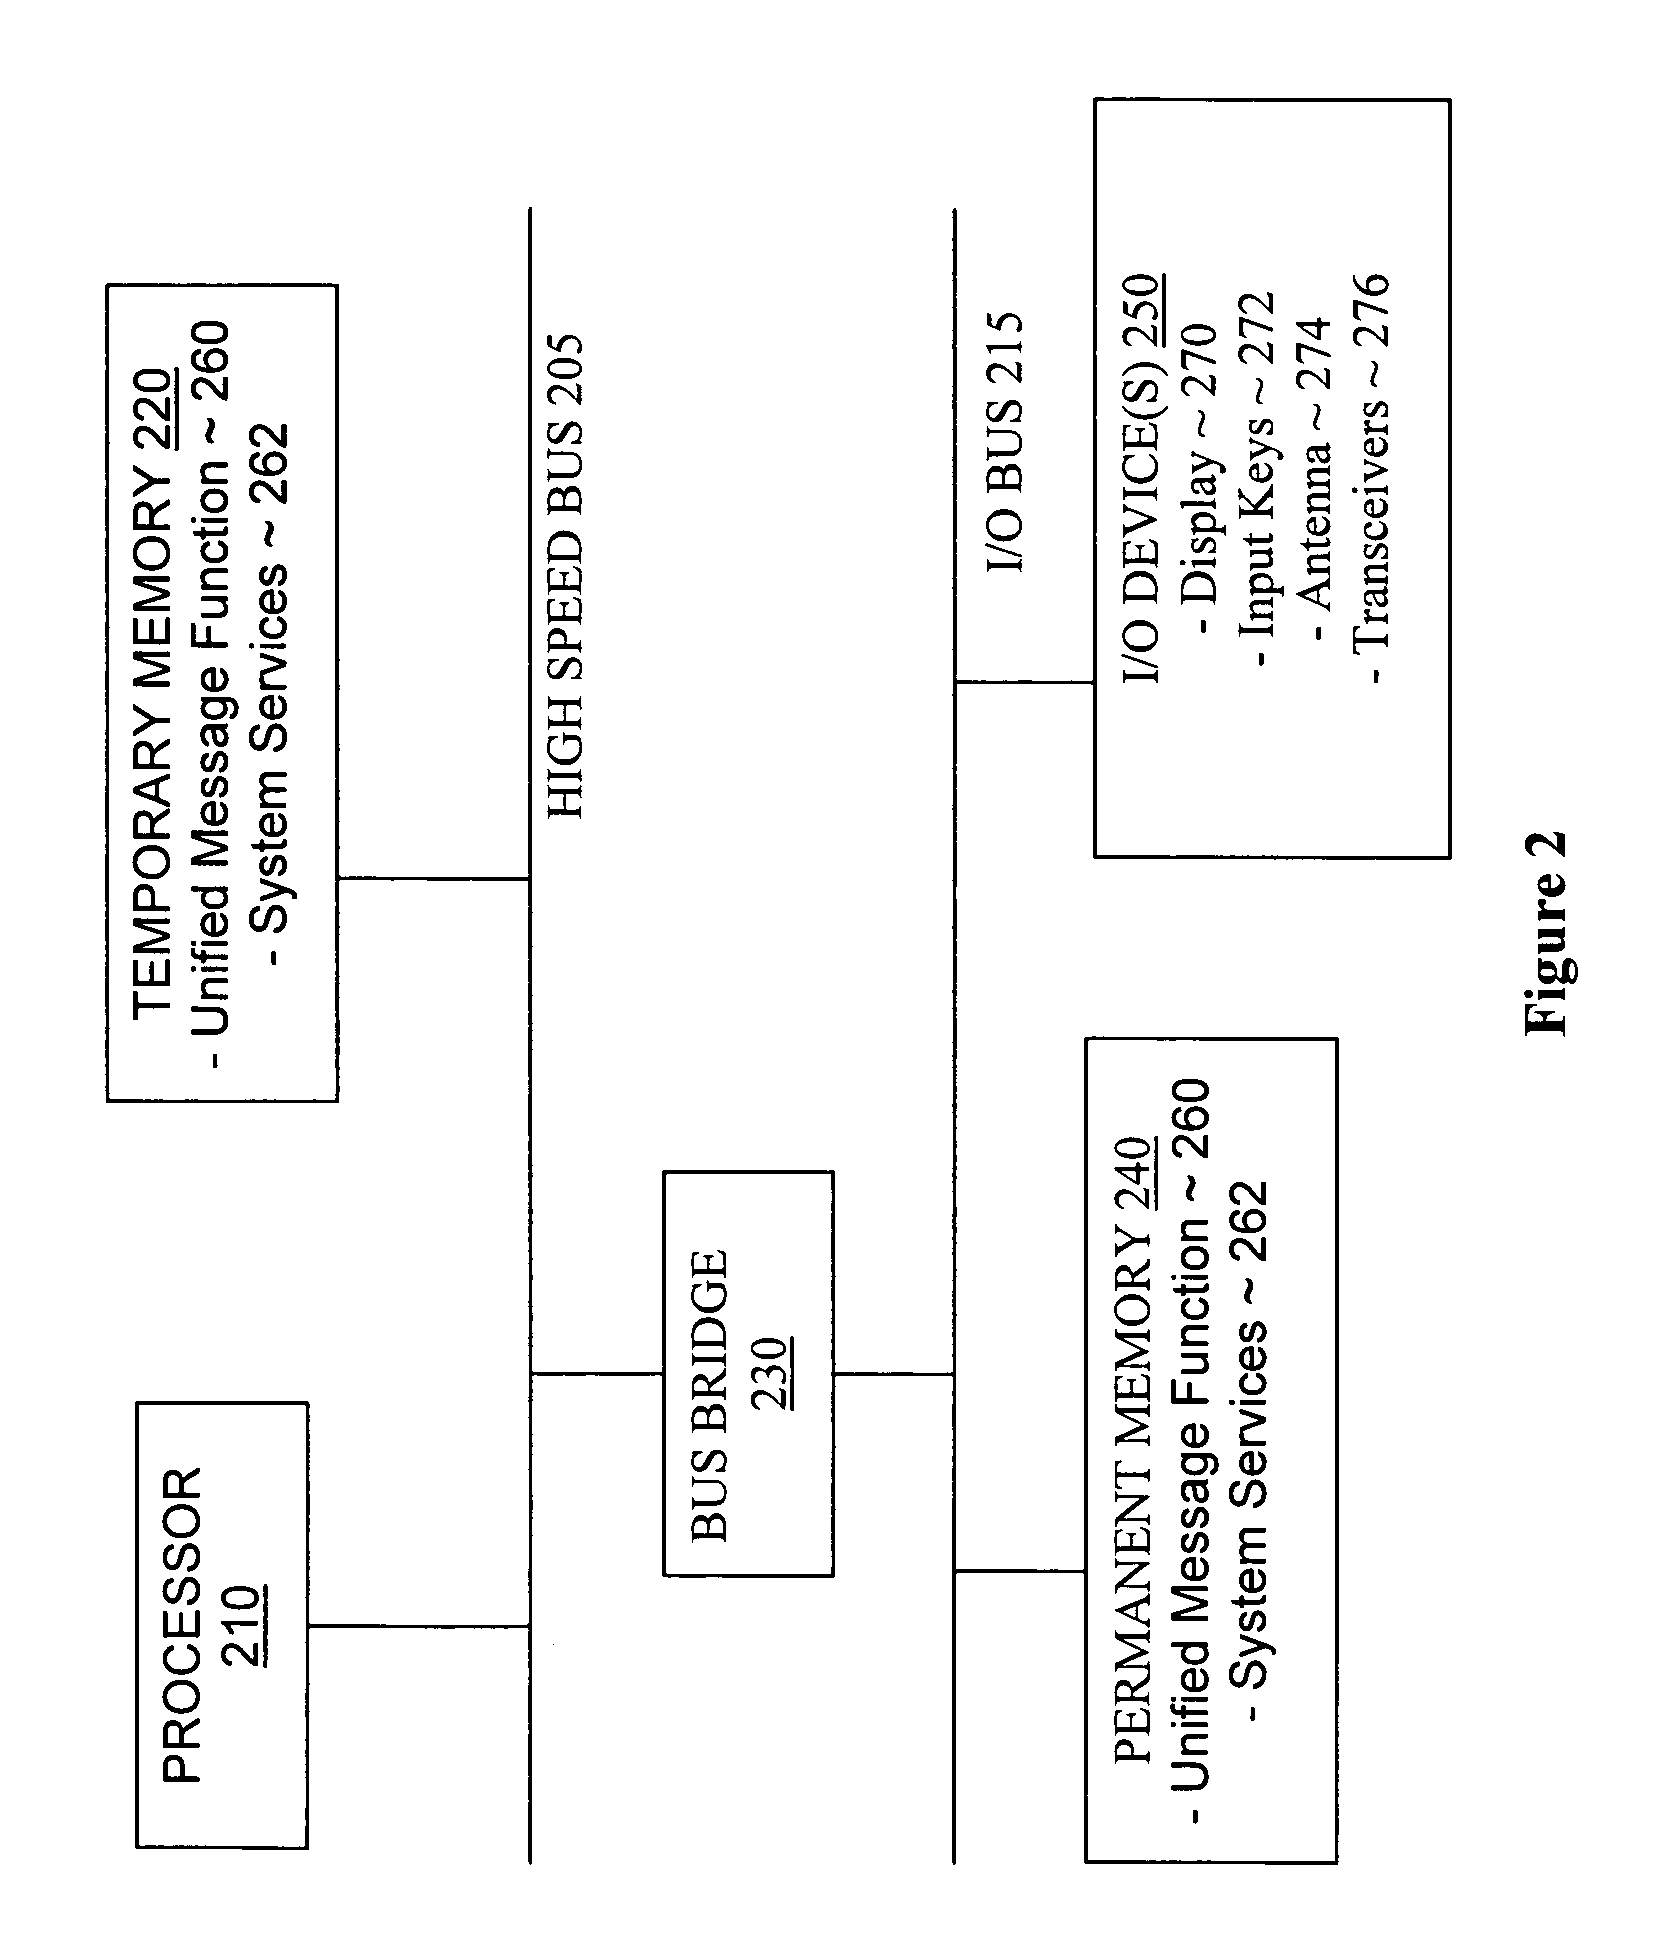 Unified message box for wireless mobile communication devices